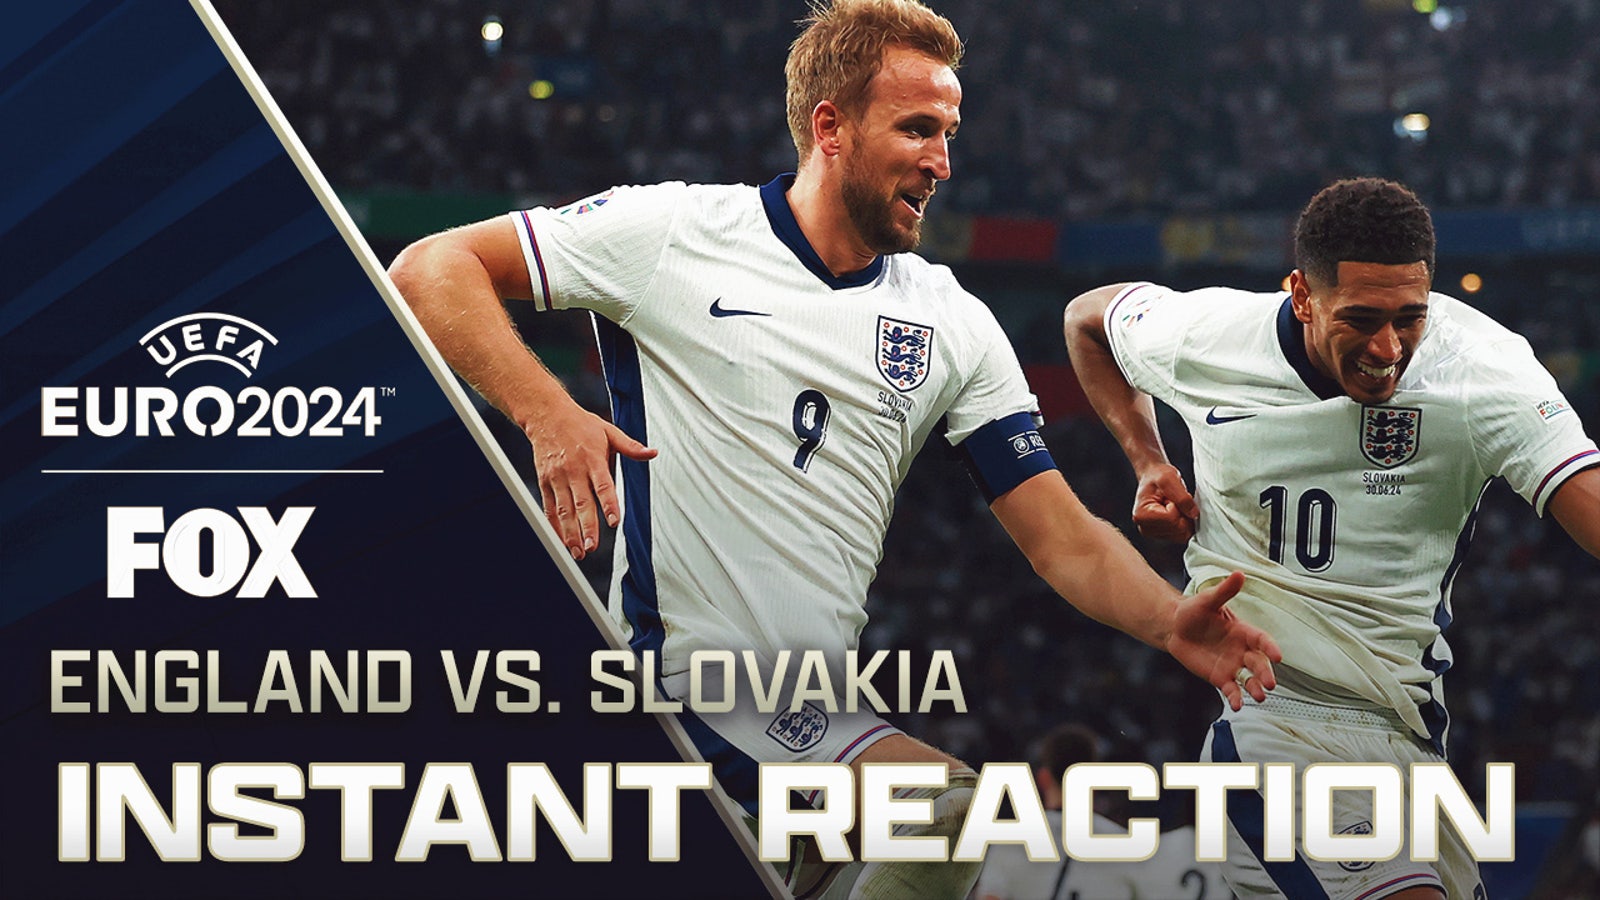 England vs. Slovakia: Instant Analysis following the match of the tournament so far